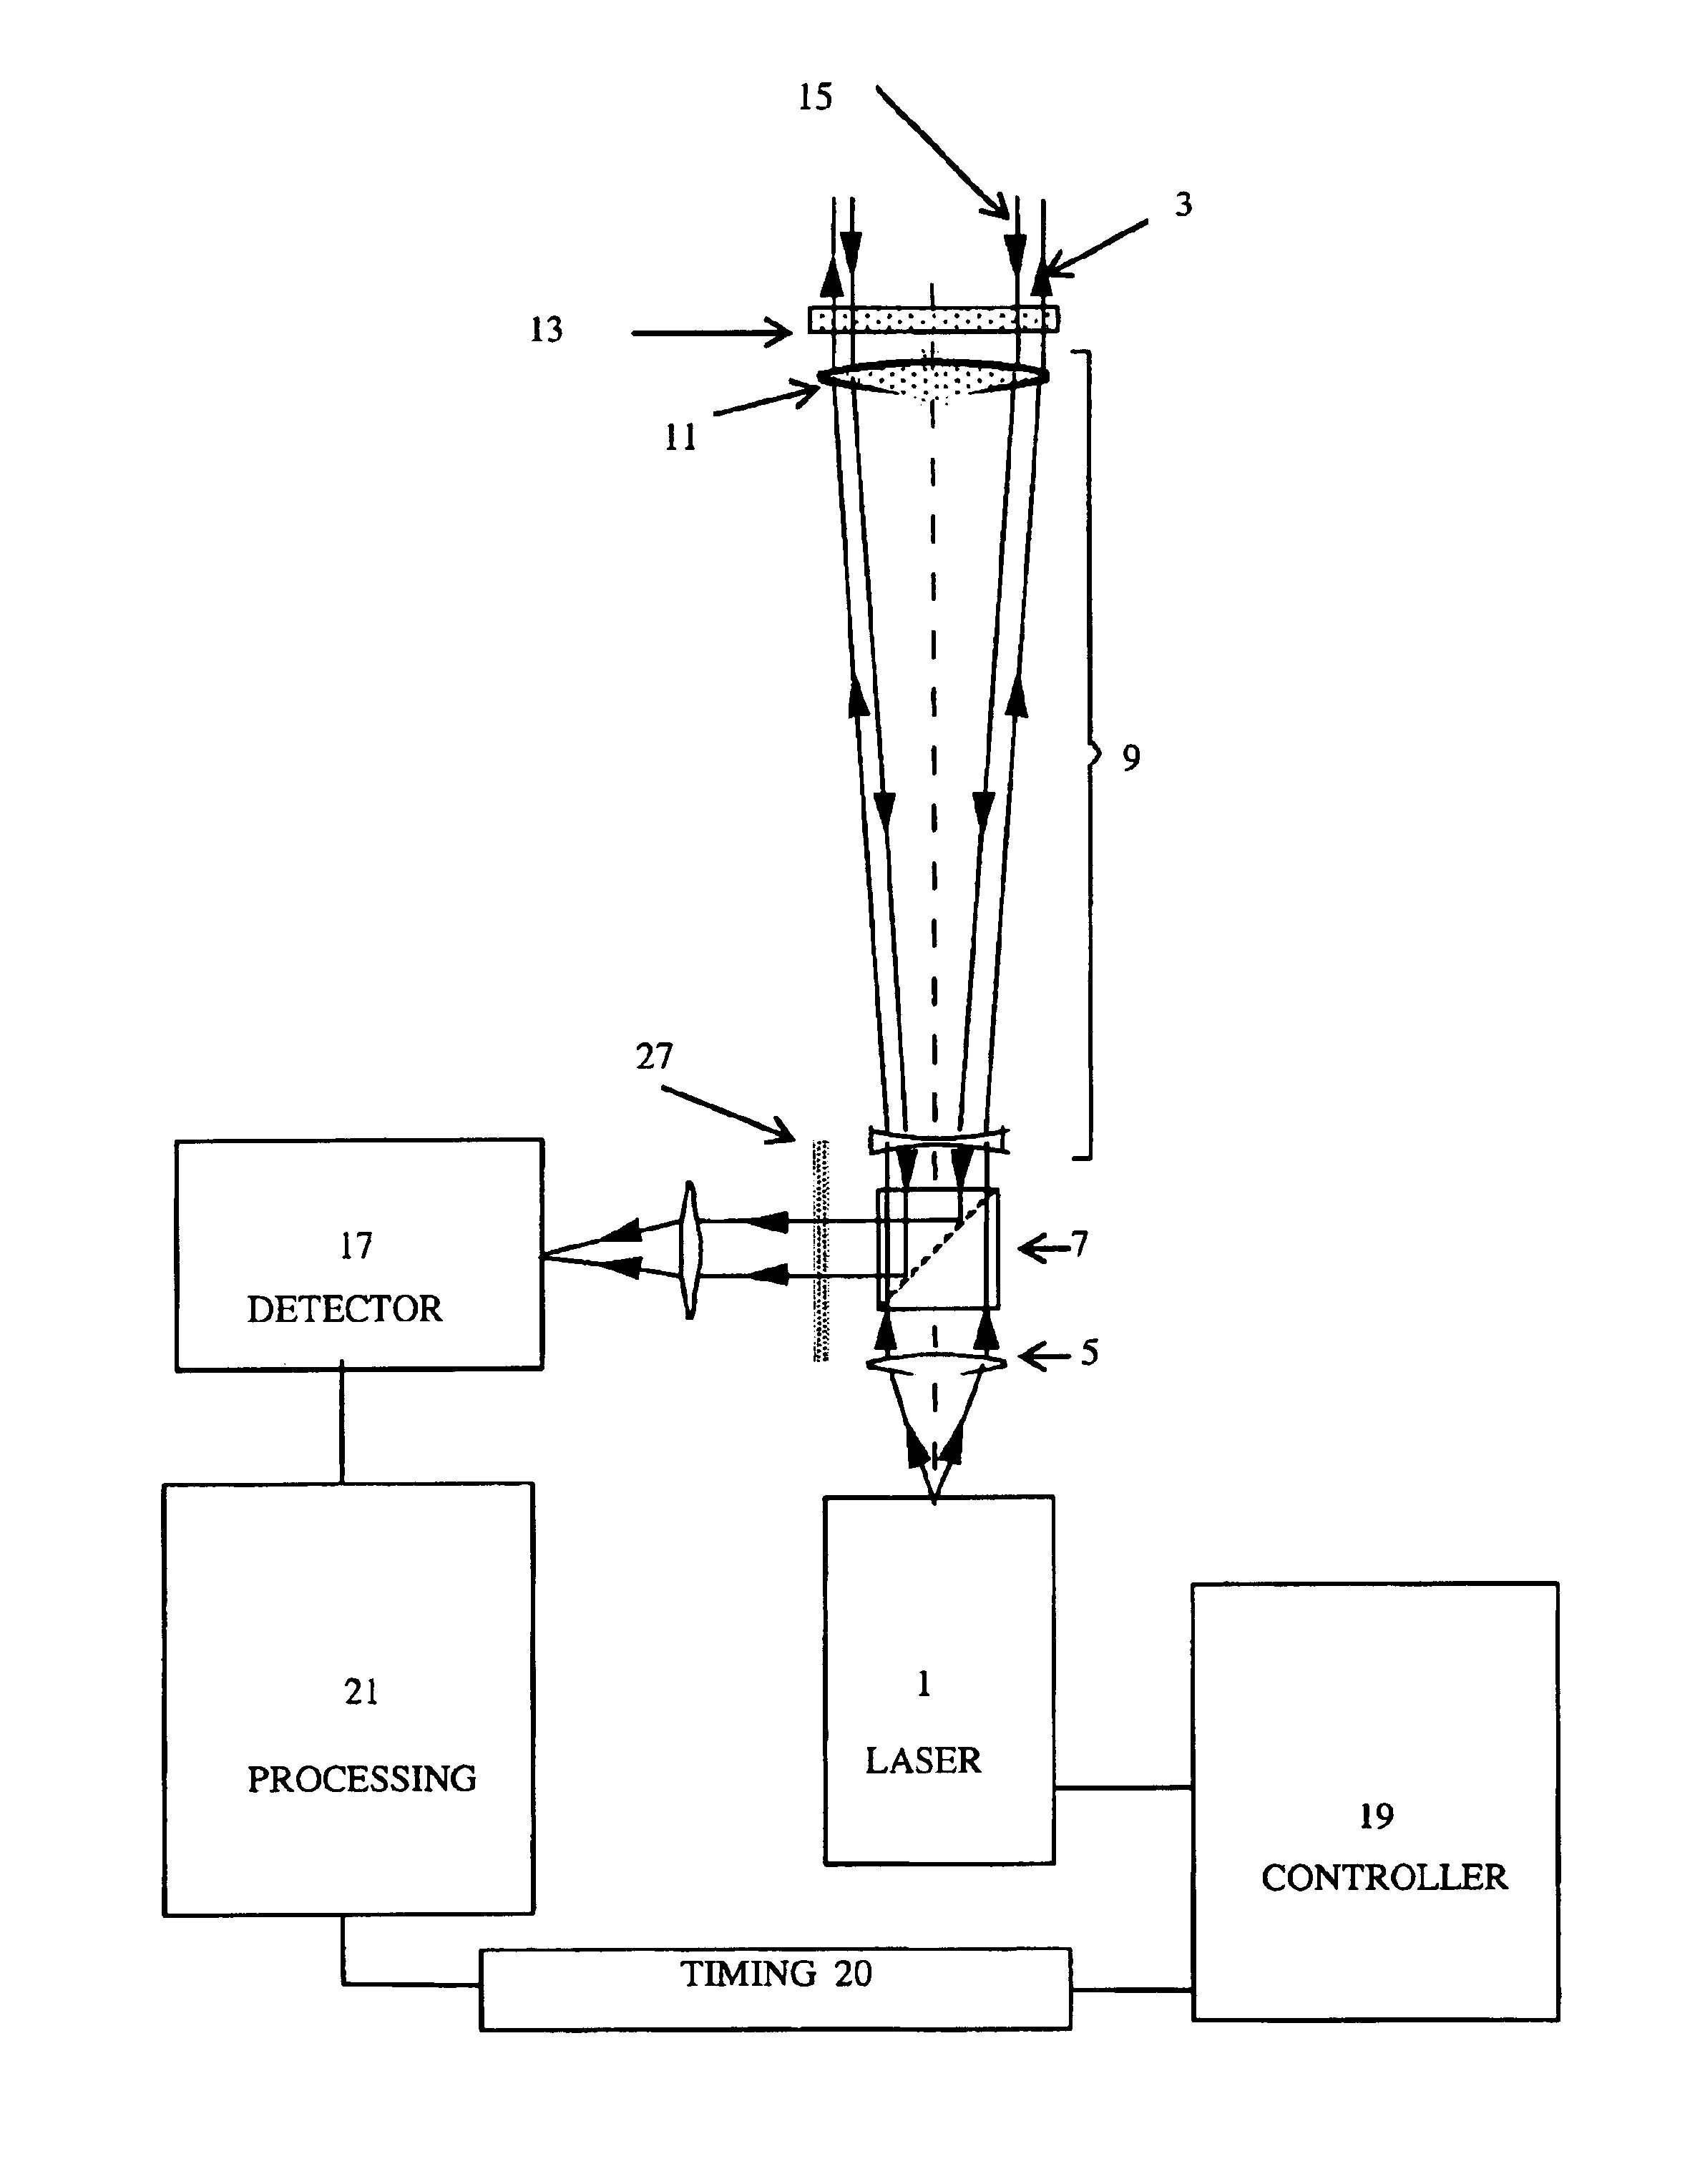 Apparatus for and method of optical detection and analysis of an object